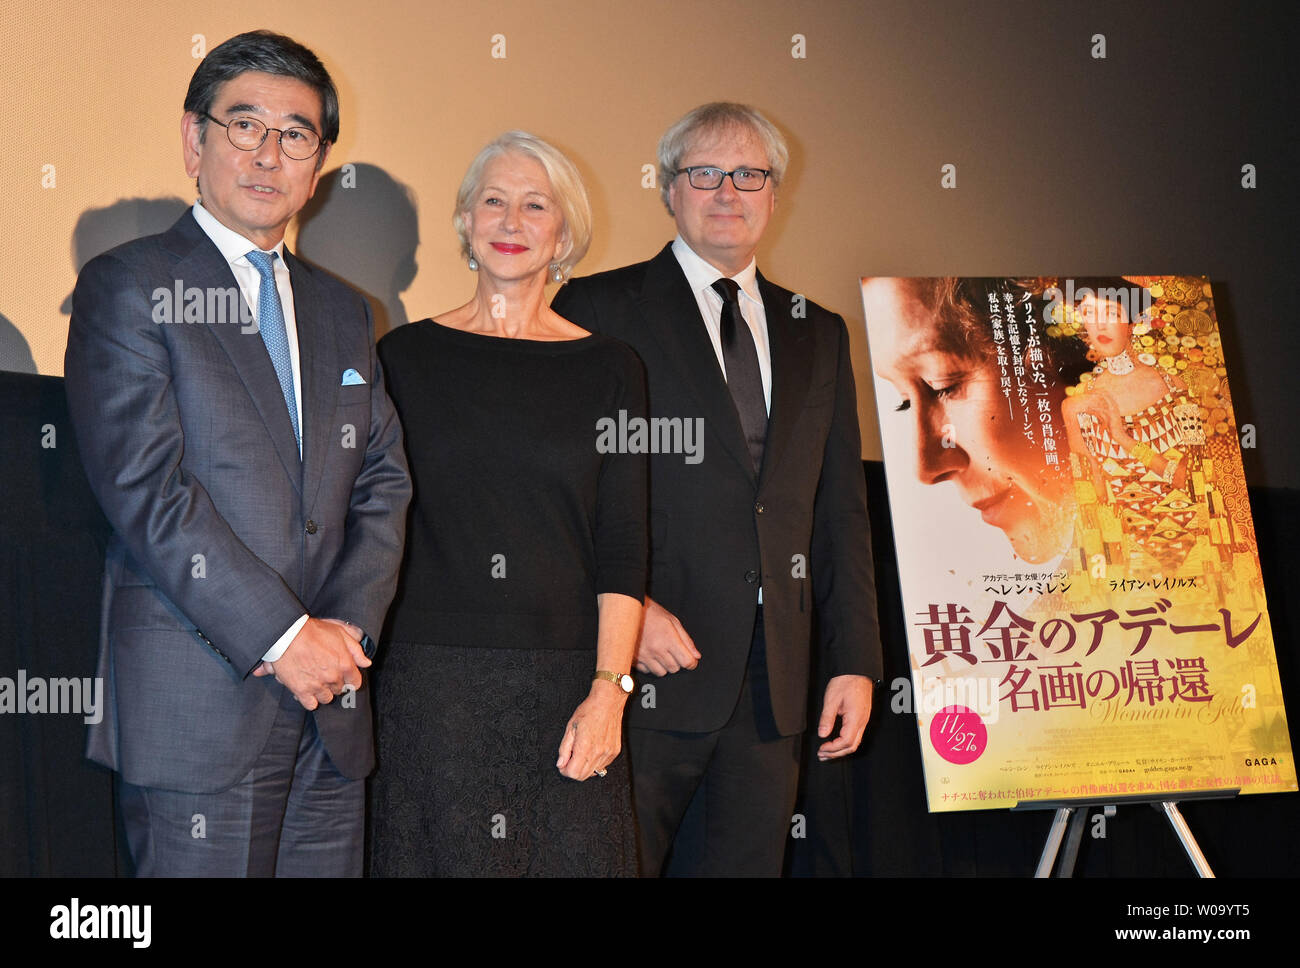 (L-R)Japanese actor Koji Ishizaka, actress Helen Mirren and Director Simon Curtis attend the stage greeting for the film 'Woman in Gold' during the 'Tokyo International film festival 2015' in Tokyo, Japan on October 24, 2015.     Photo by Keizo Mori/UPI Stock Photo